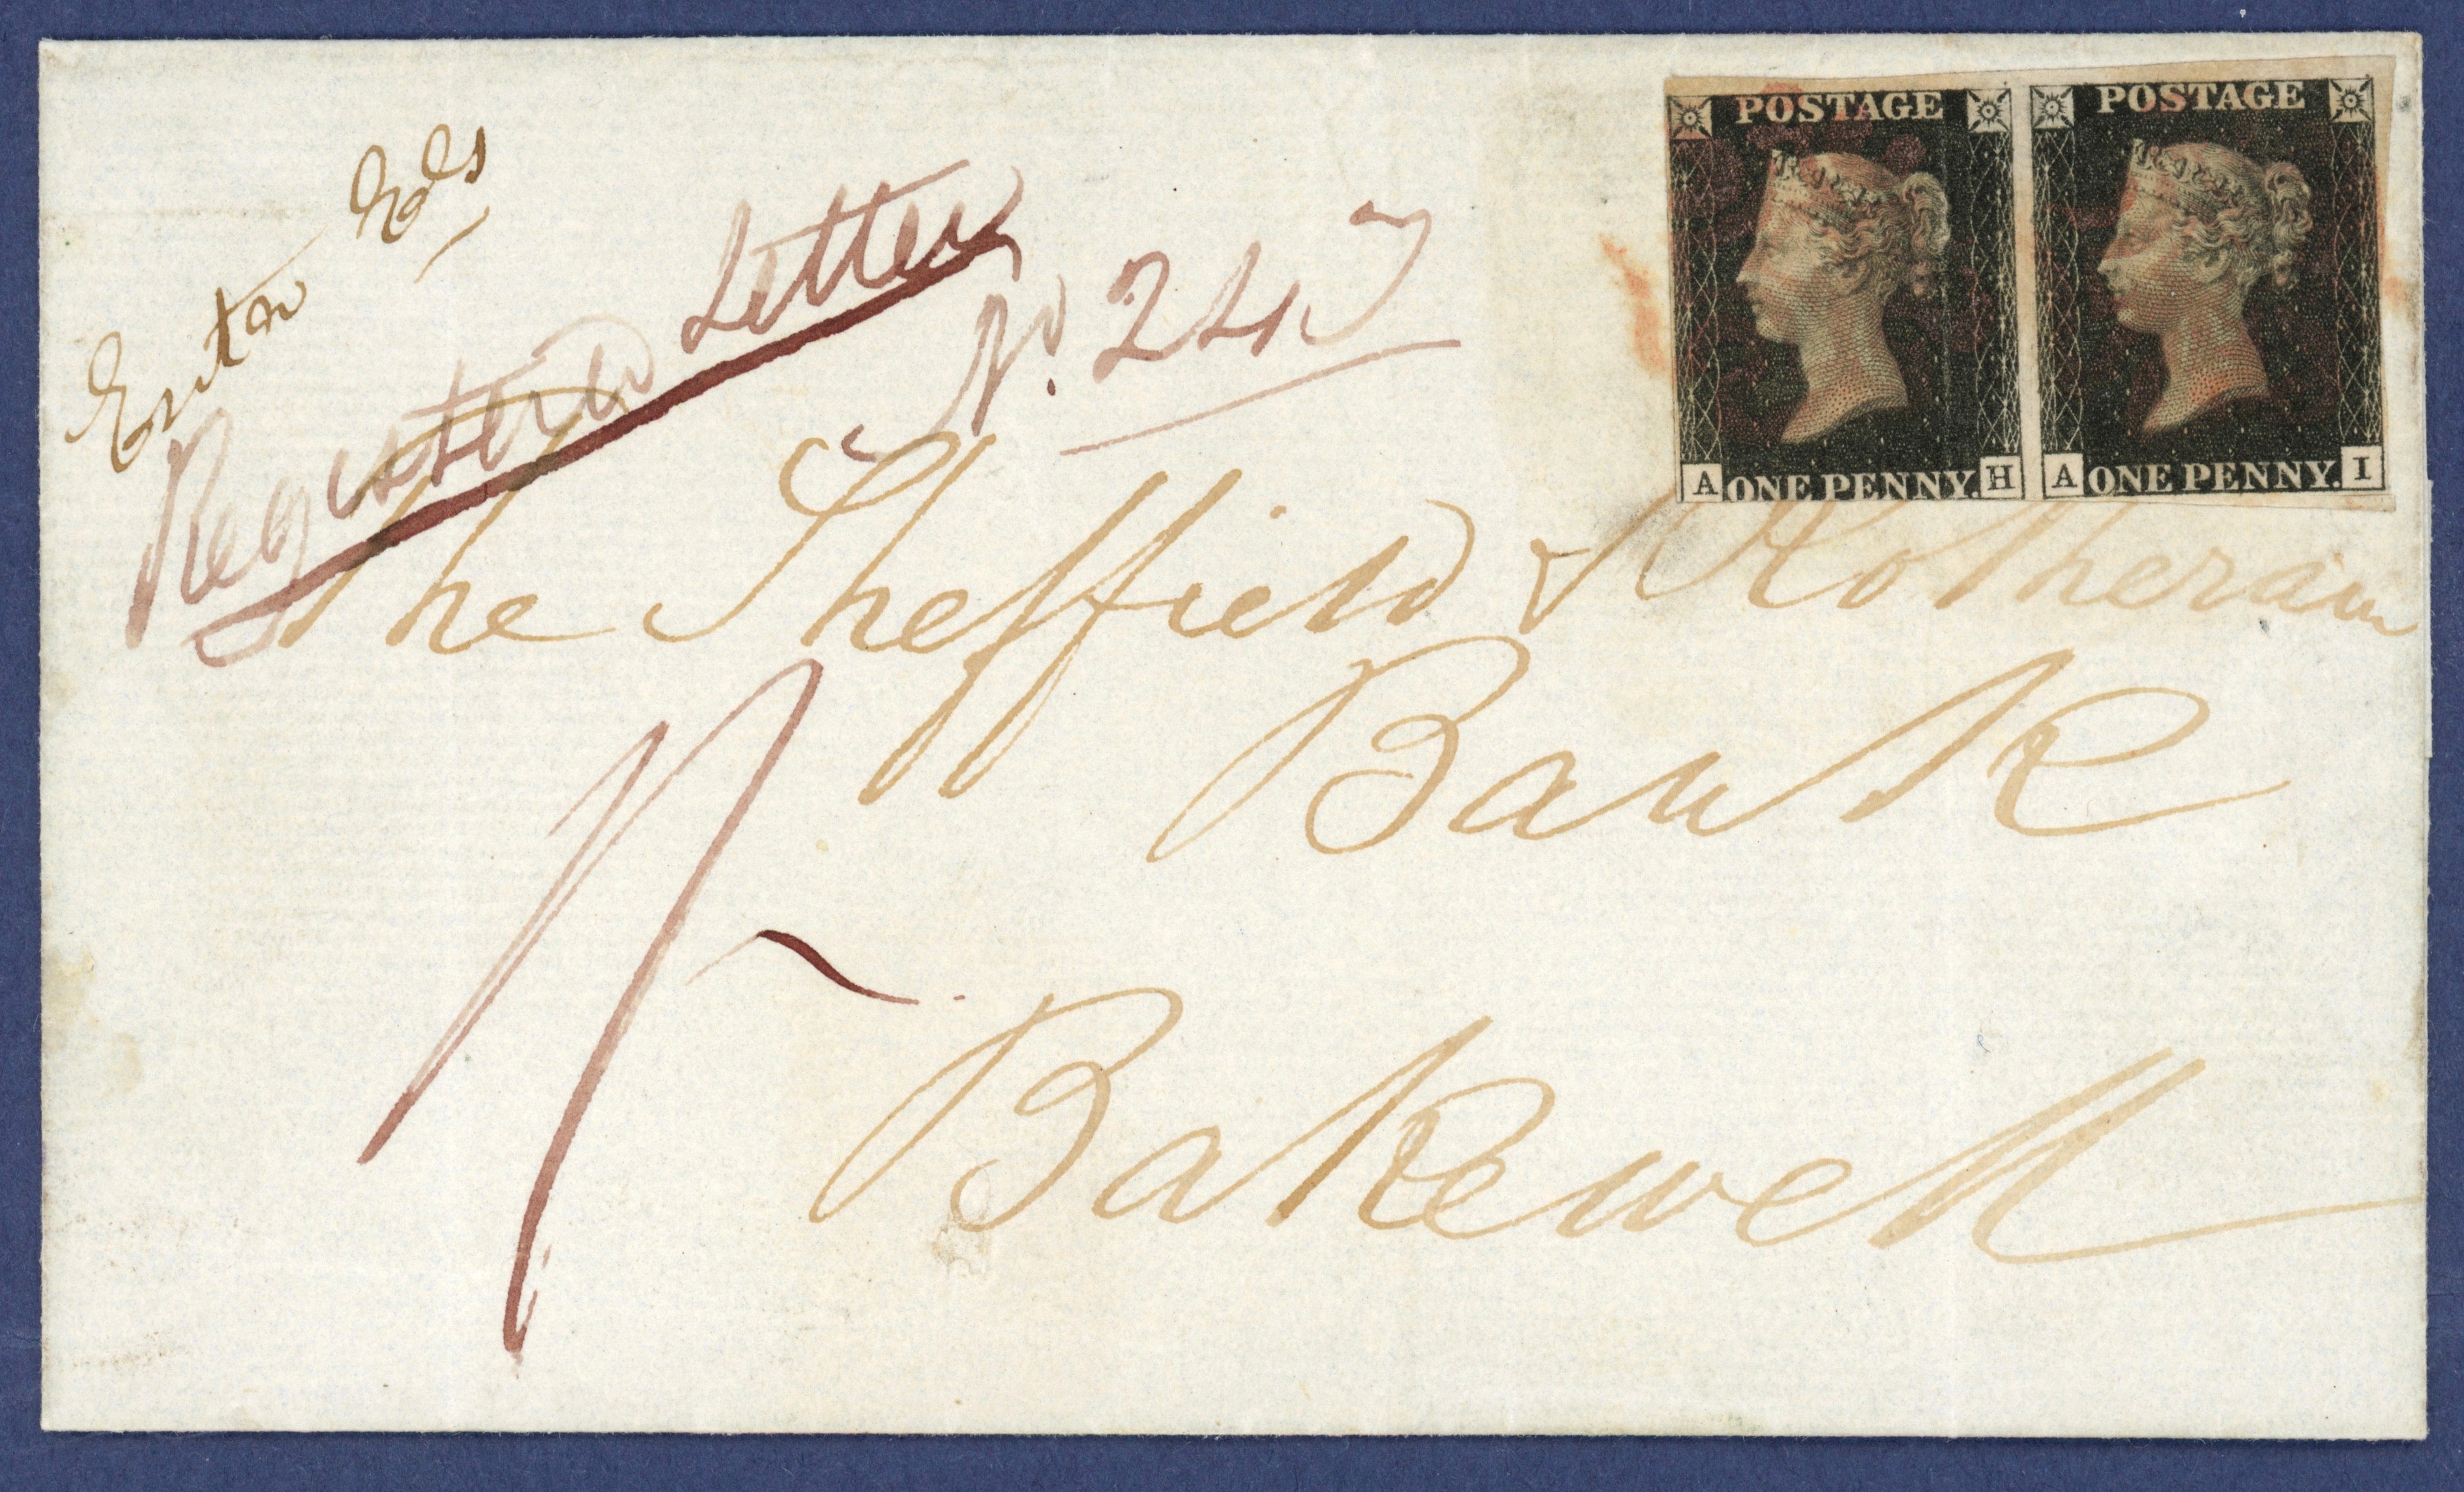 Two Penny Black stamps, used on an envelope